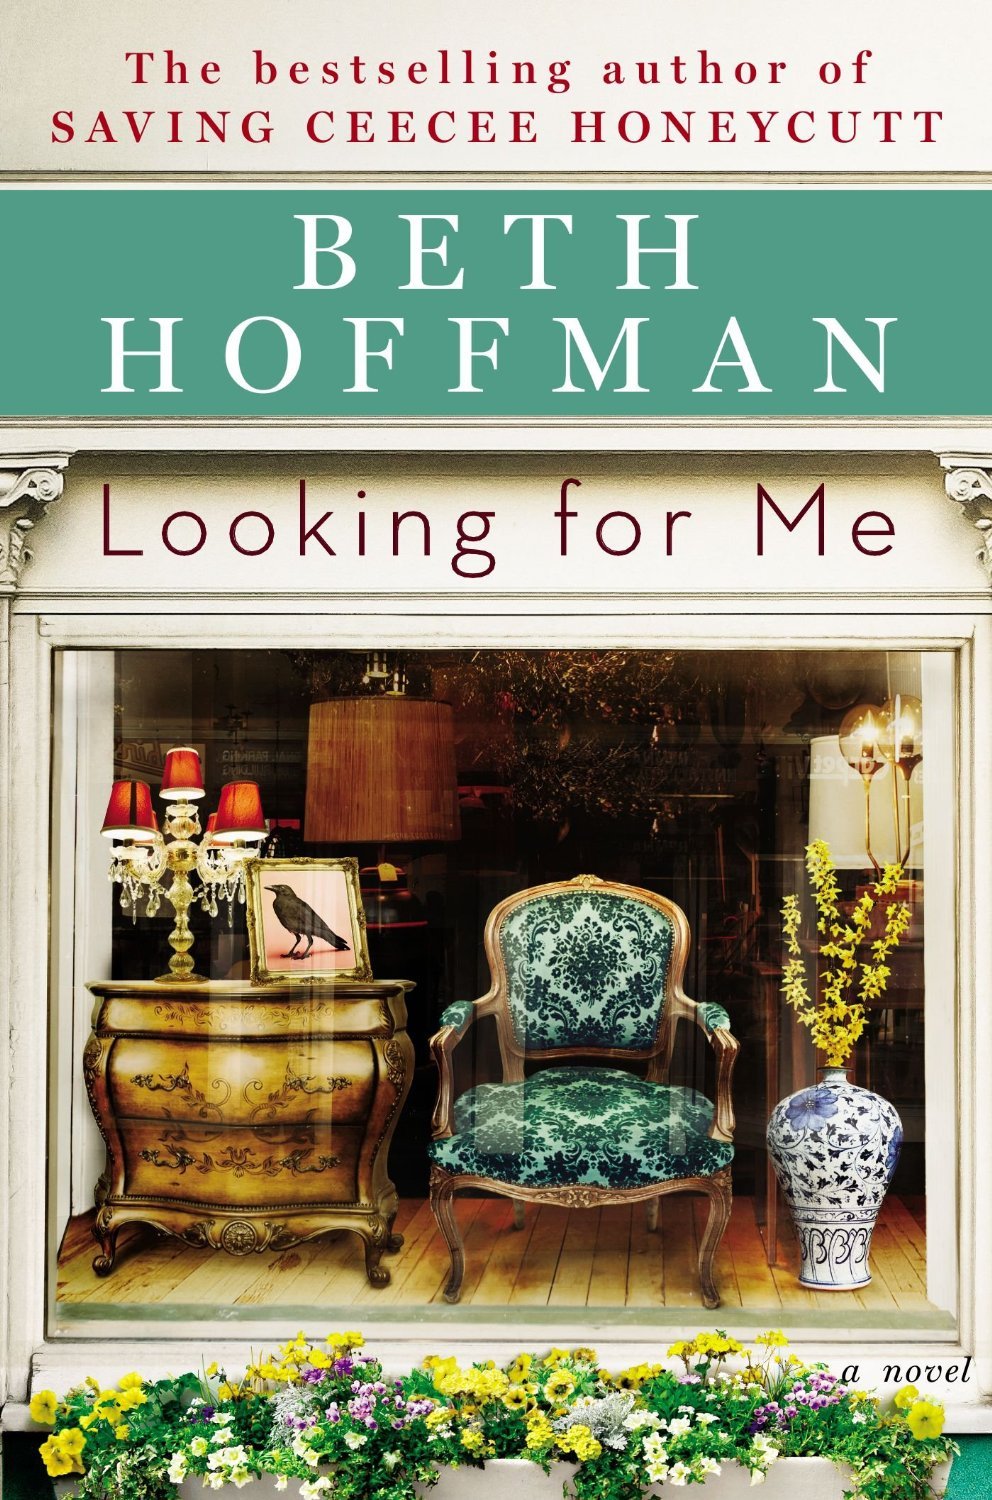 REVIEW: LOOKING FOR ME by Beth Hoffman